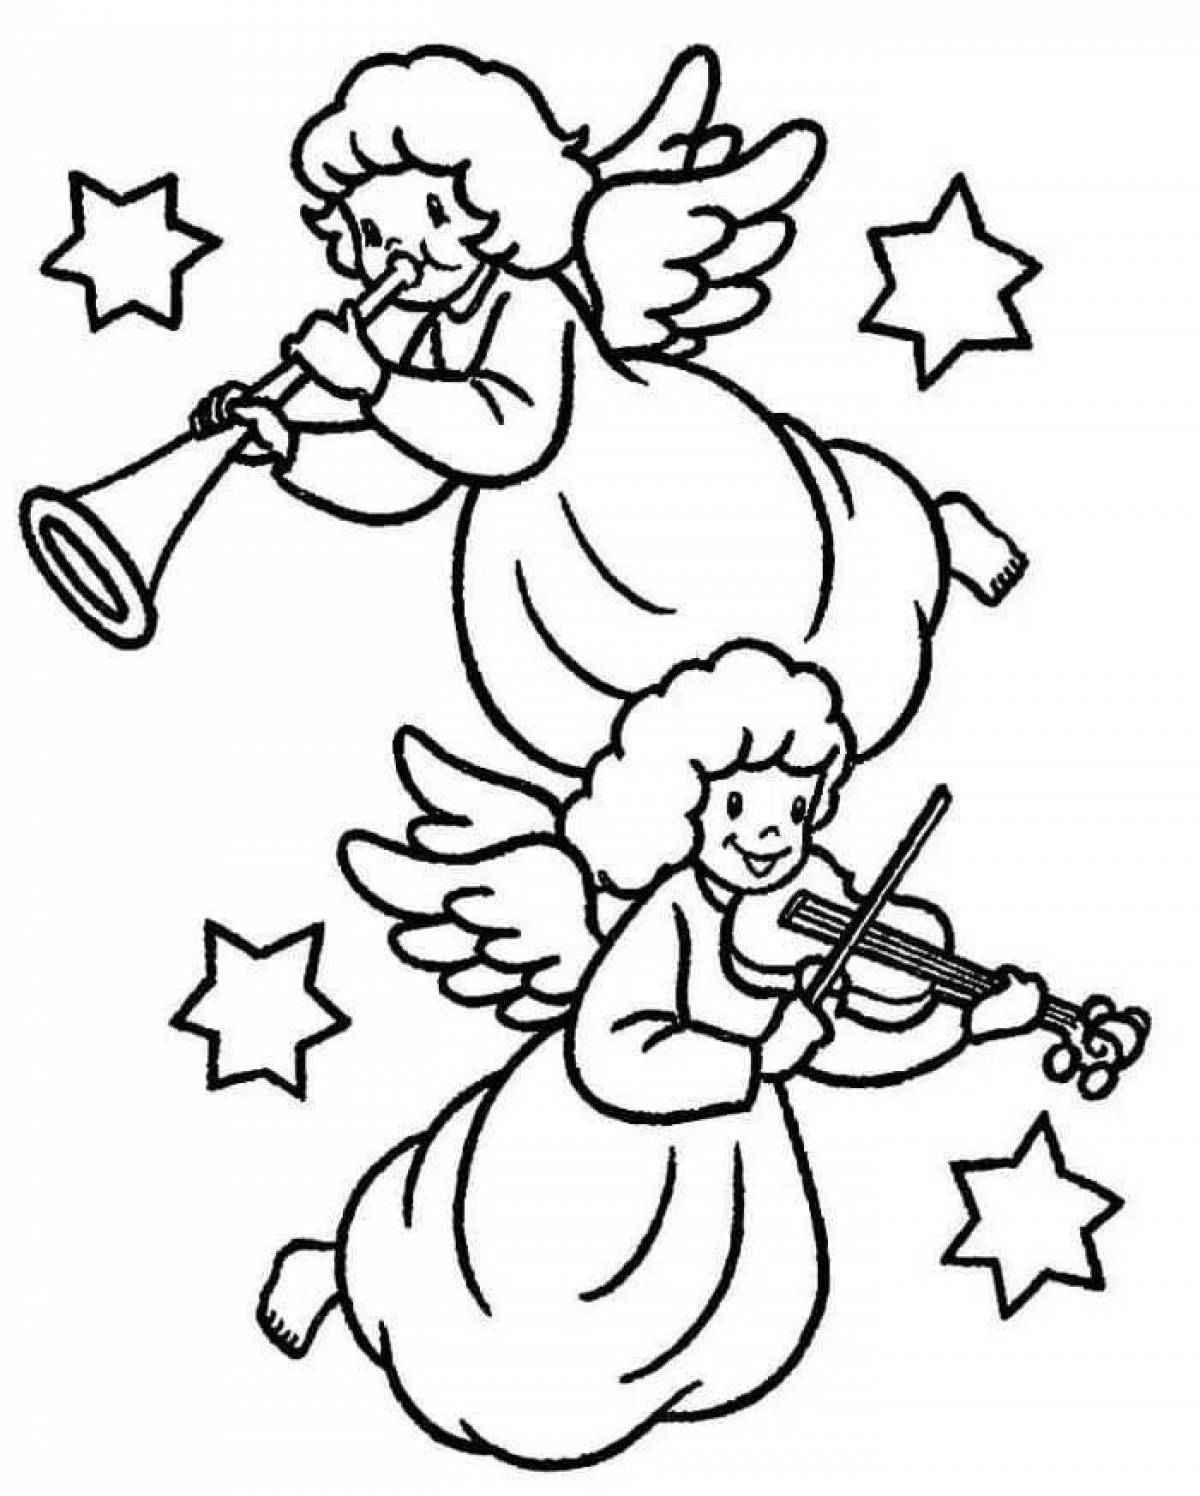 Shining Christmas angel coloring pages for kids